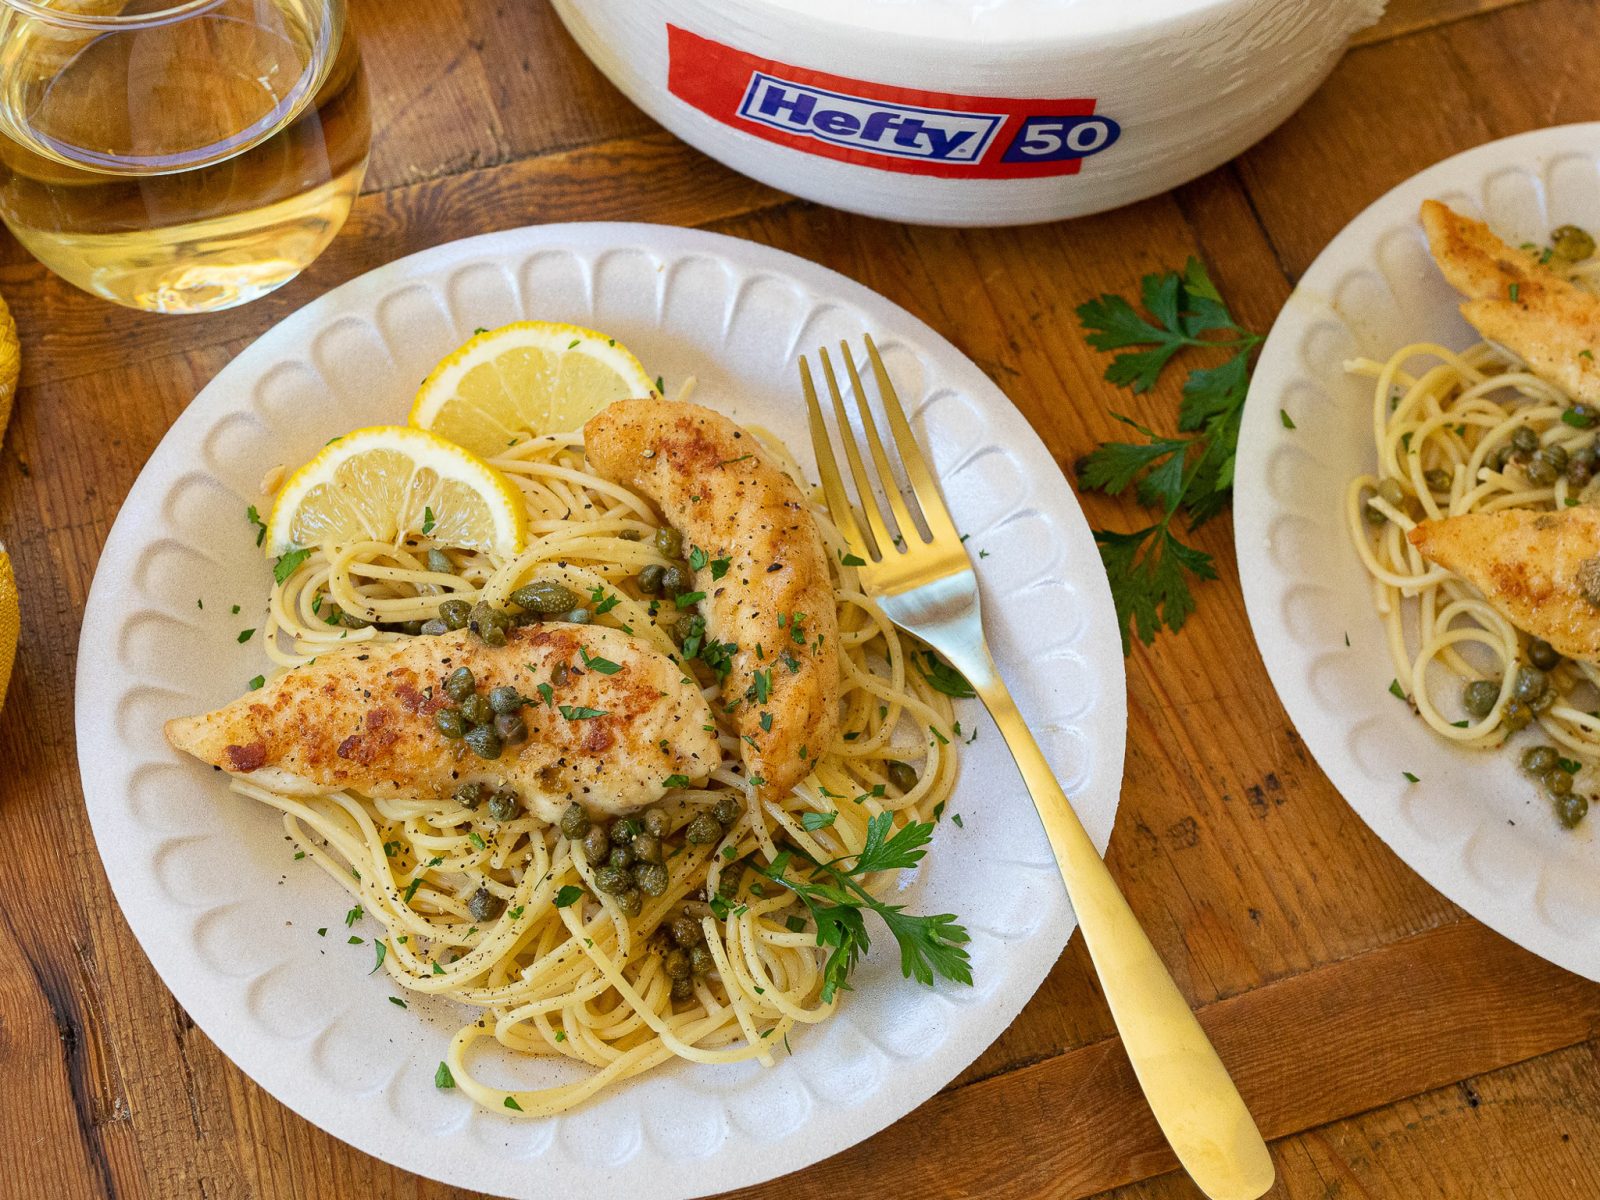 Stock Up On Hefty® Everyday™ Foam Plates During The BOGO Sale At Publix – Perfect For My Delicious Chicken Piccata